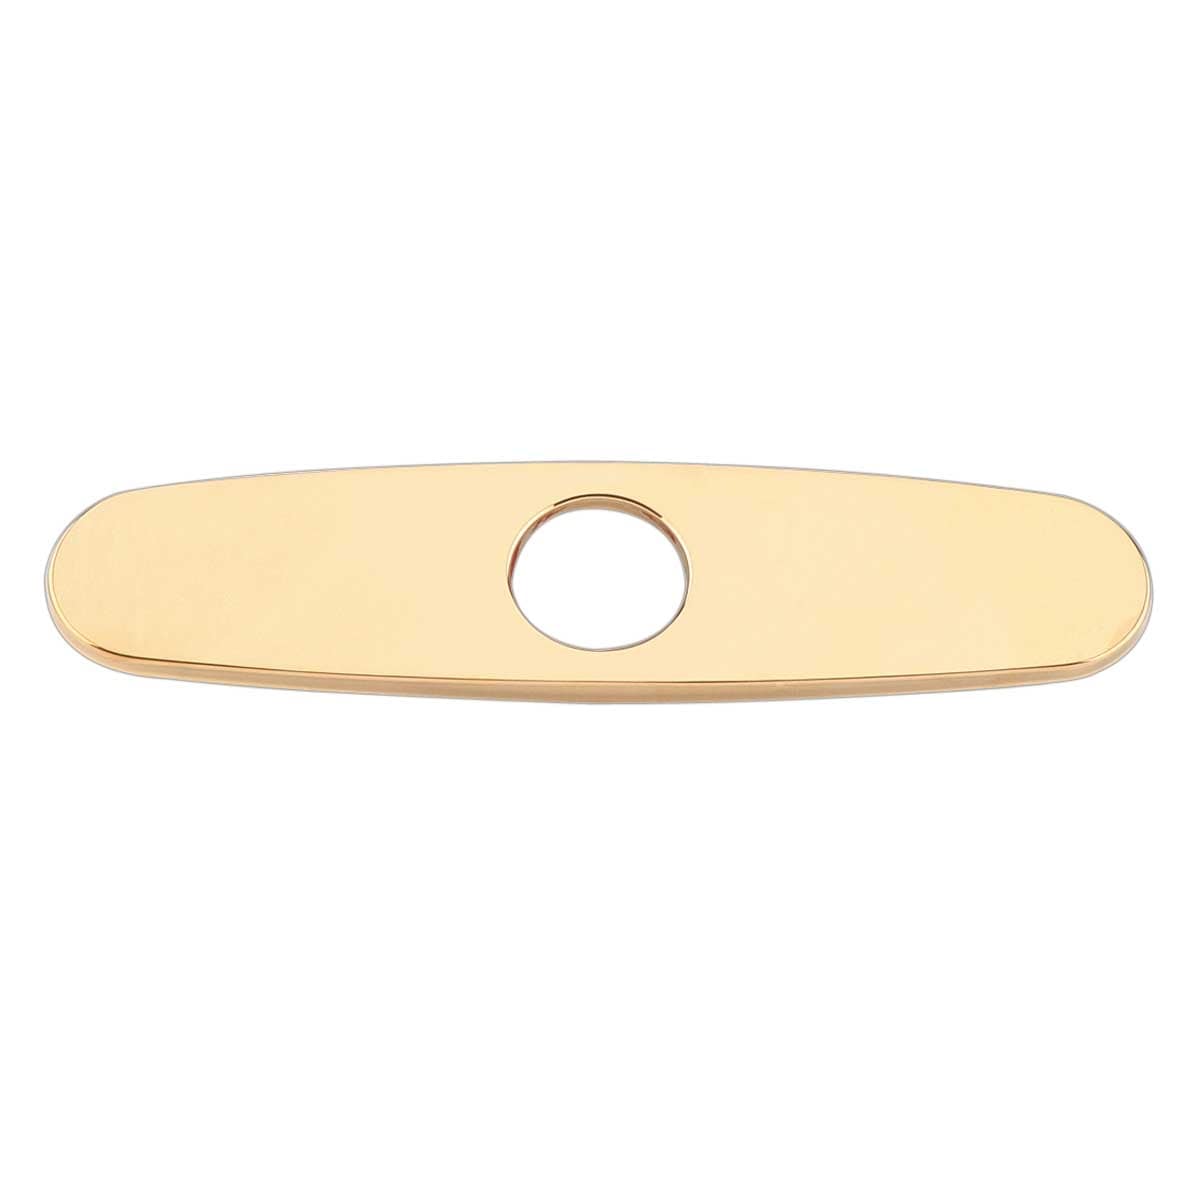 Shop Bathroom Faucet Plate Cover 8 Widespread Gold Pvd Brass